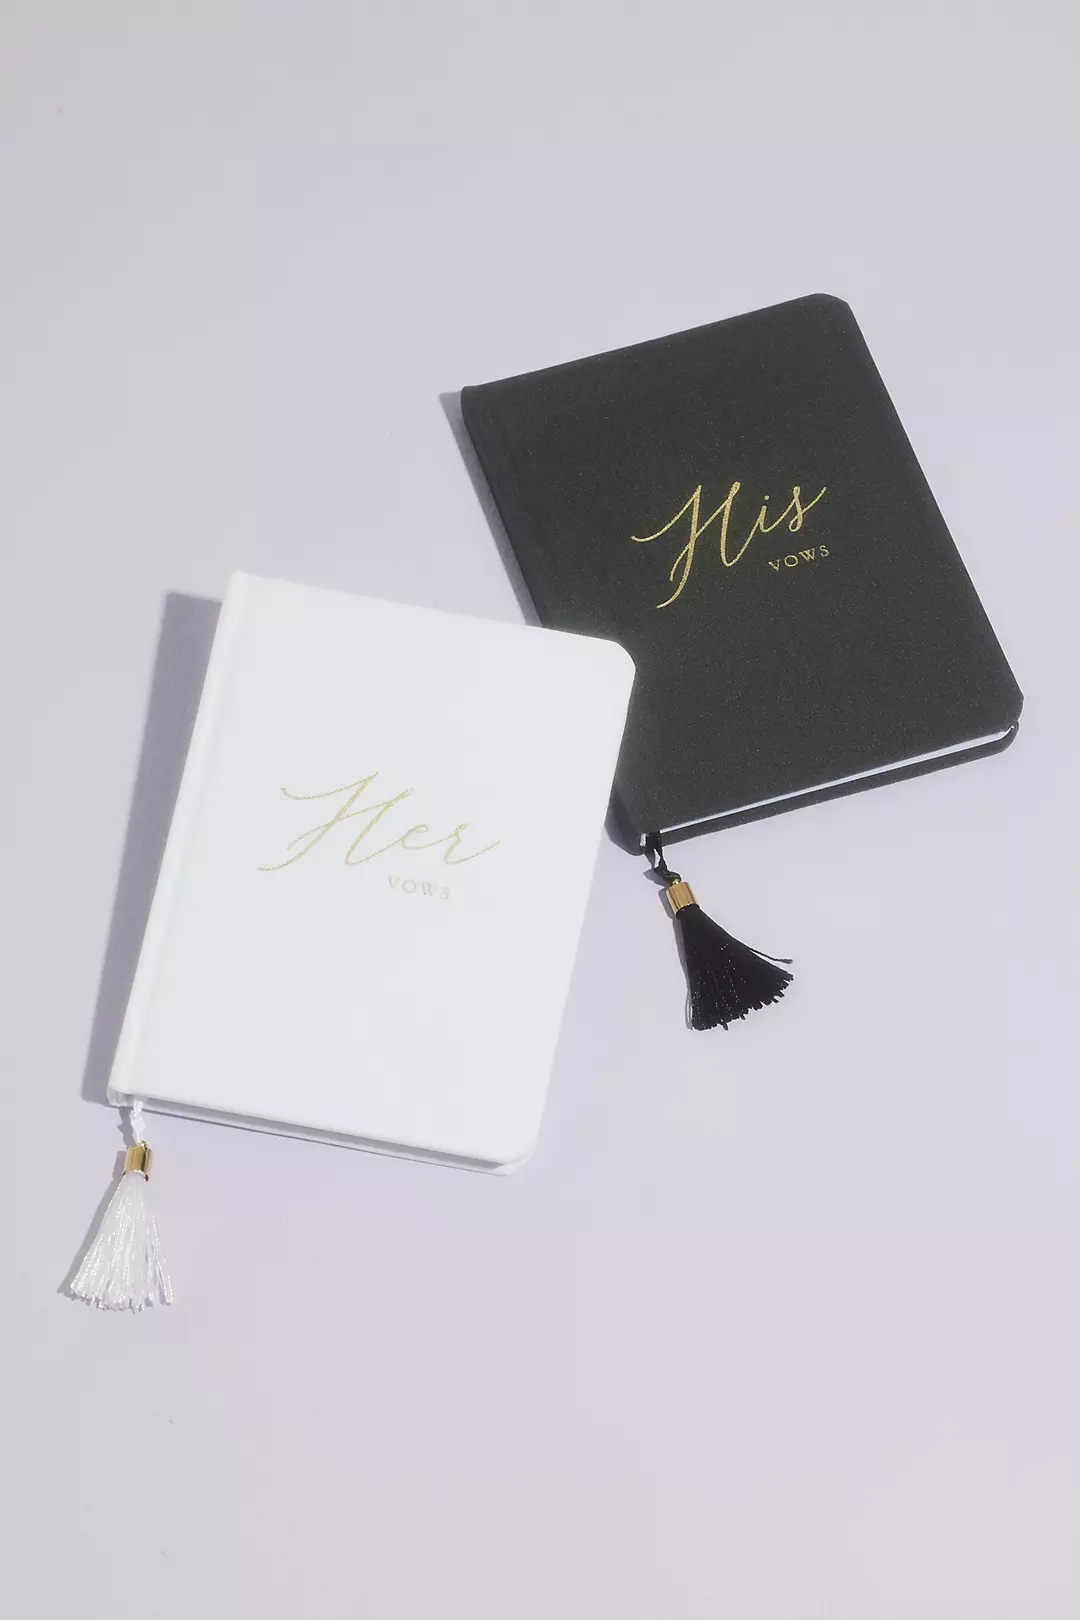 His and Hers Vows Booklets Image